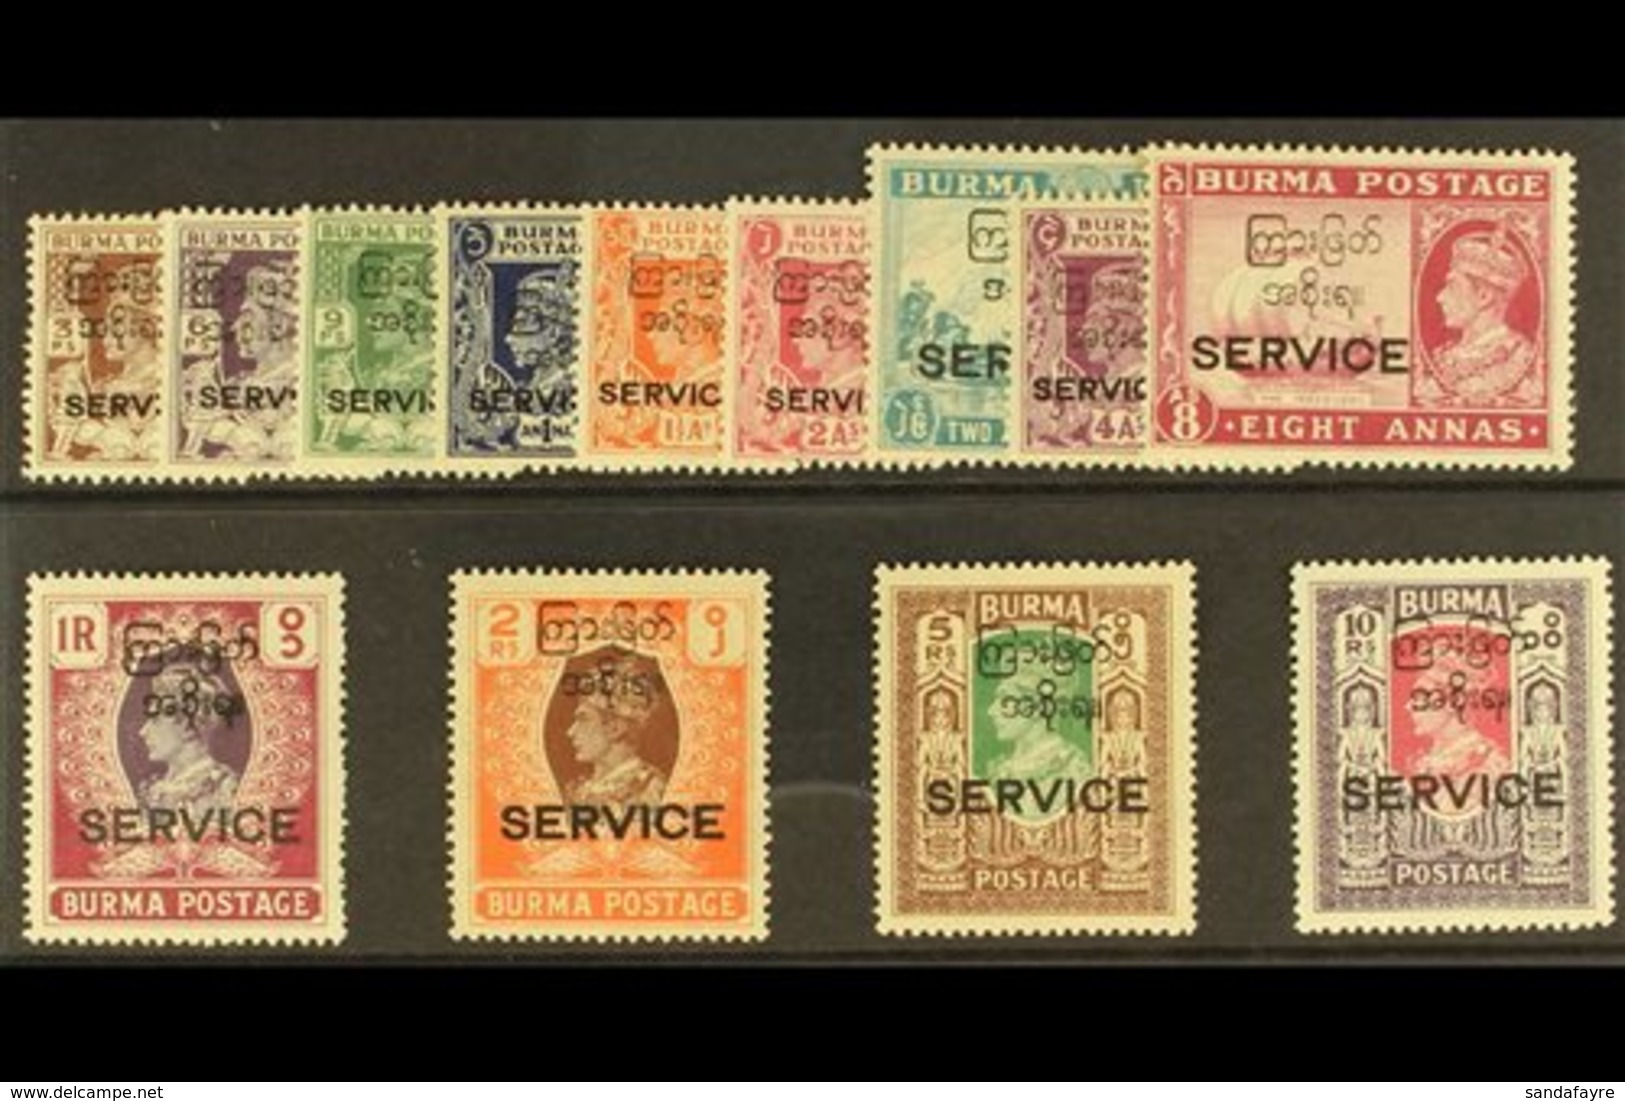 OFFICIALS 1947 Interim Government Overprinted Set Complete, SG 68/82, Never Hinged Mint, The 10r Top Value Lightly Hinge - Burma (...-1947)